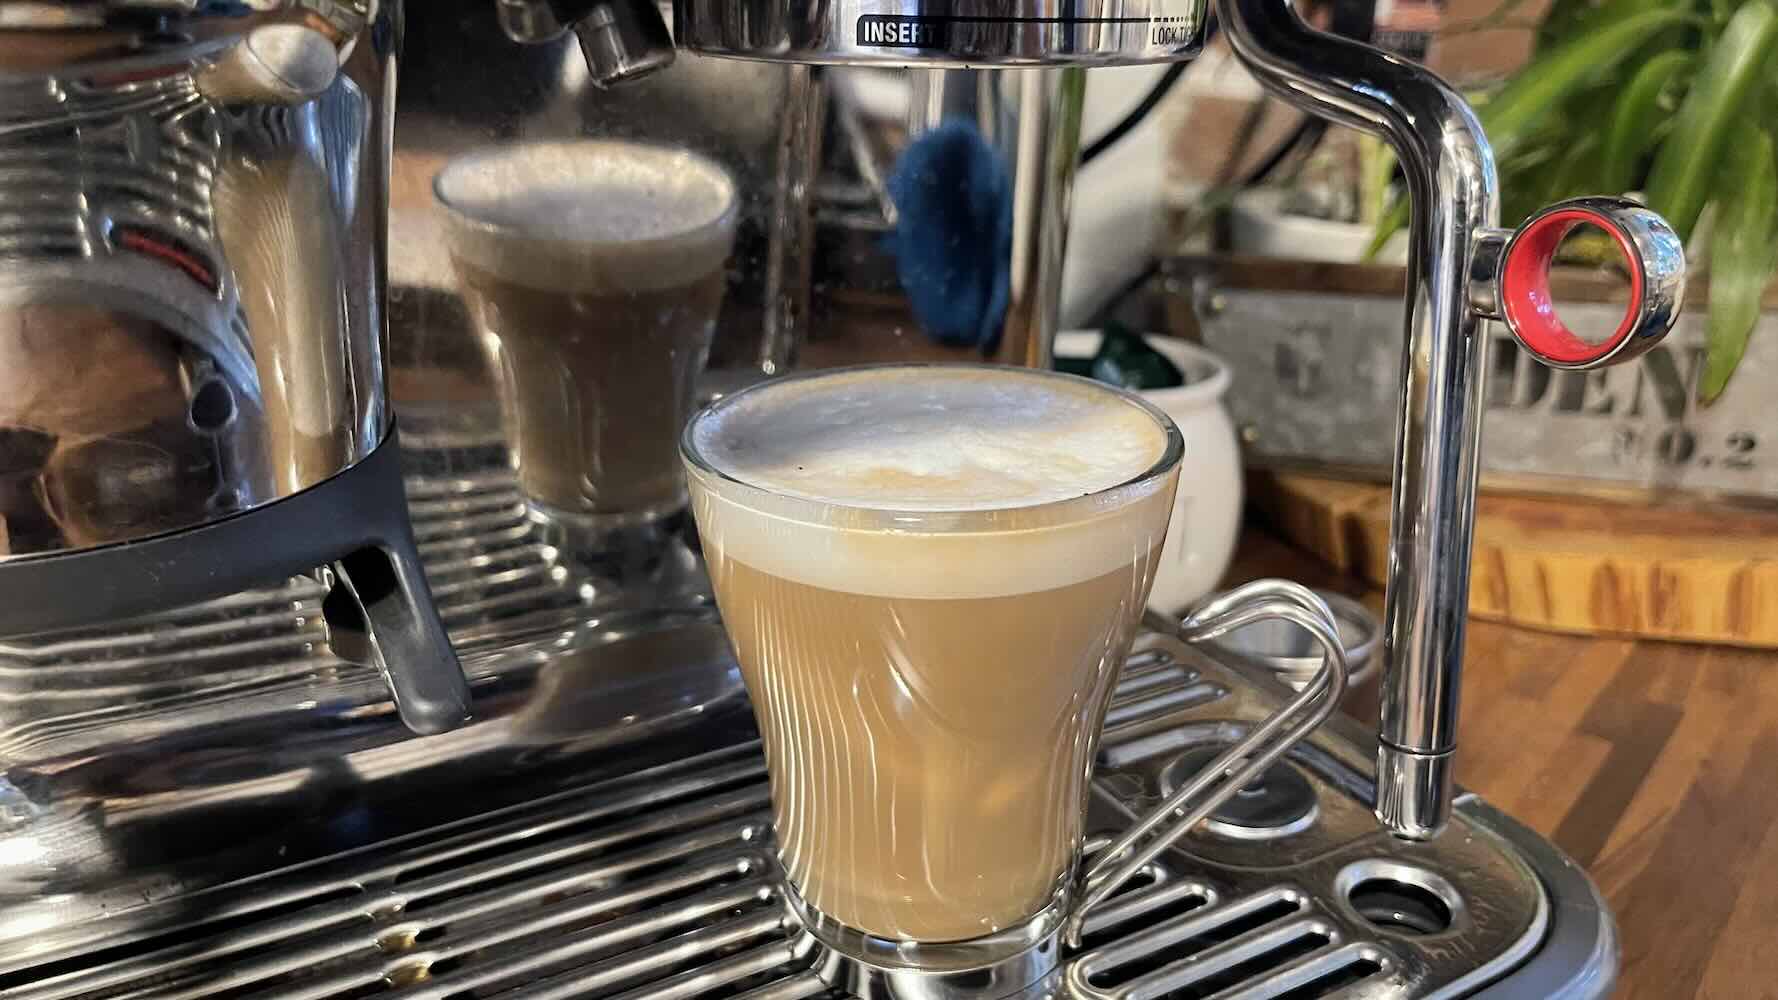 Breville Barista Express Tips & Tricks — How To Make The Perfect Latte